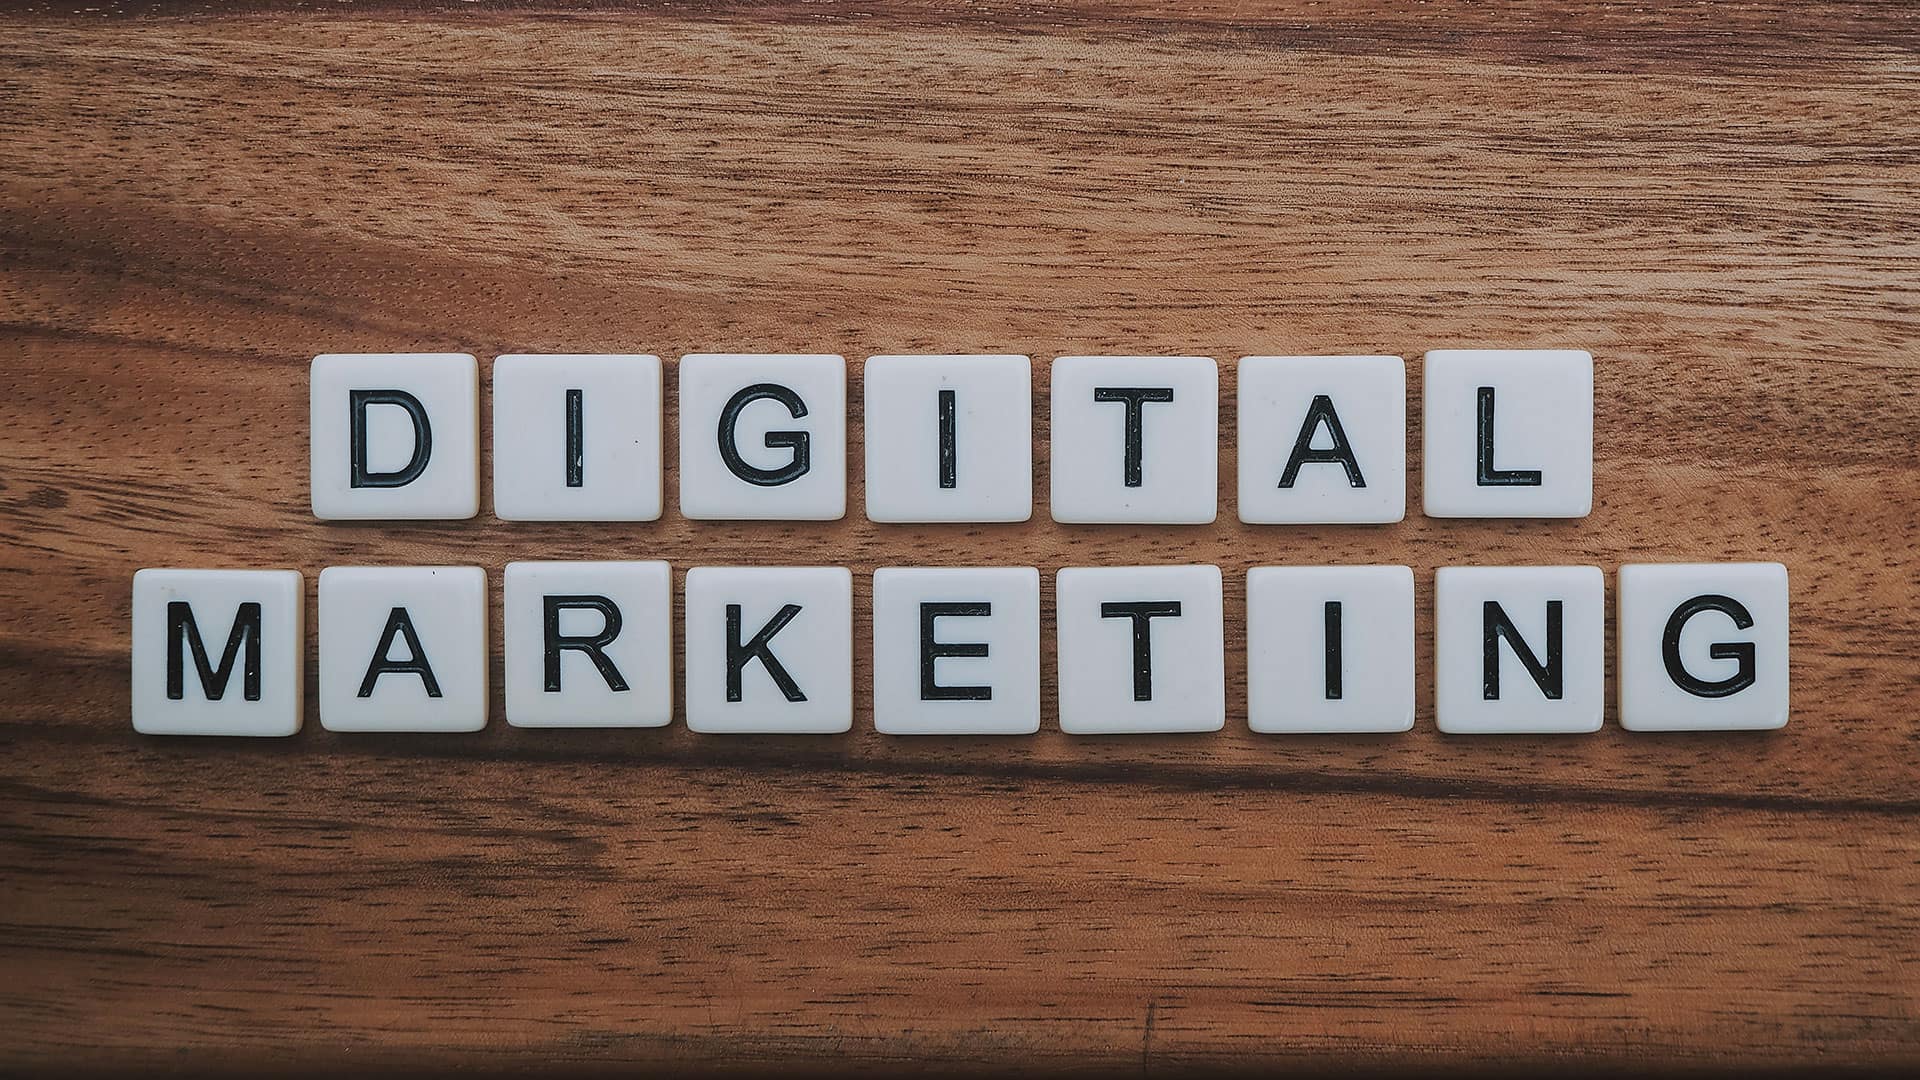 Digital Marketing Trends That Are Likely To Be Big in 2021